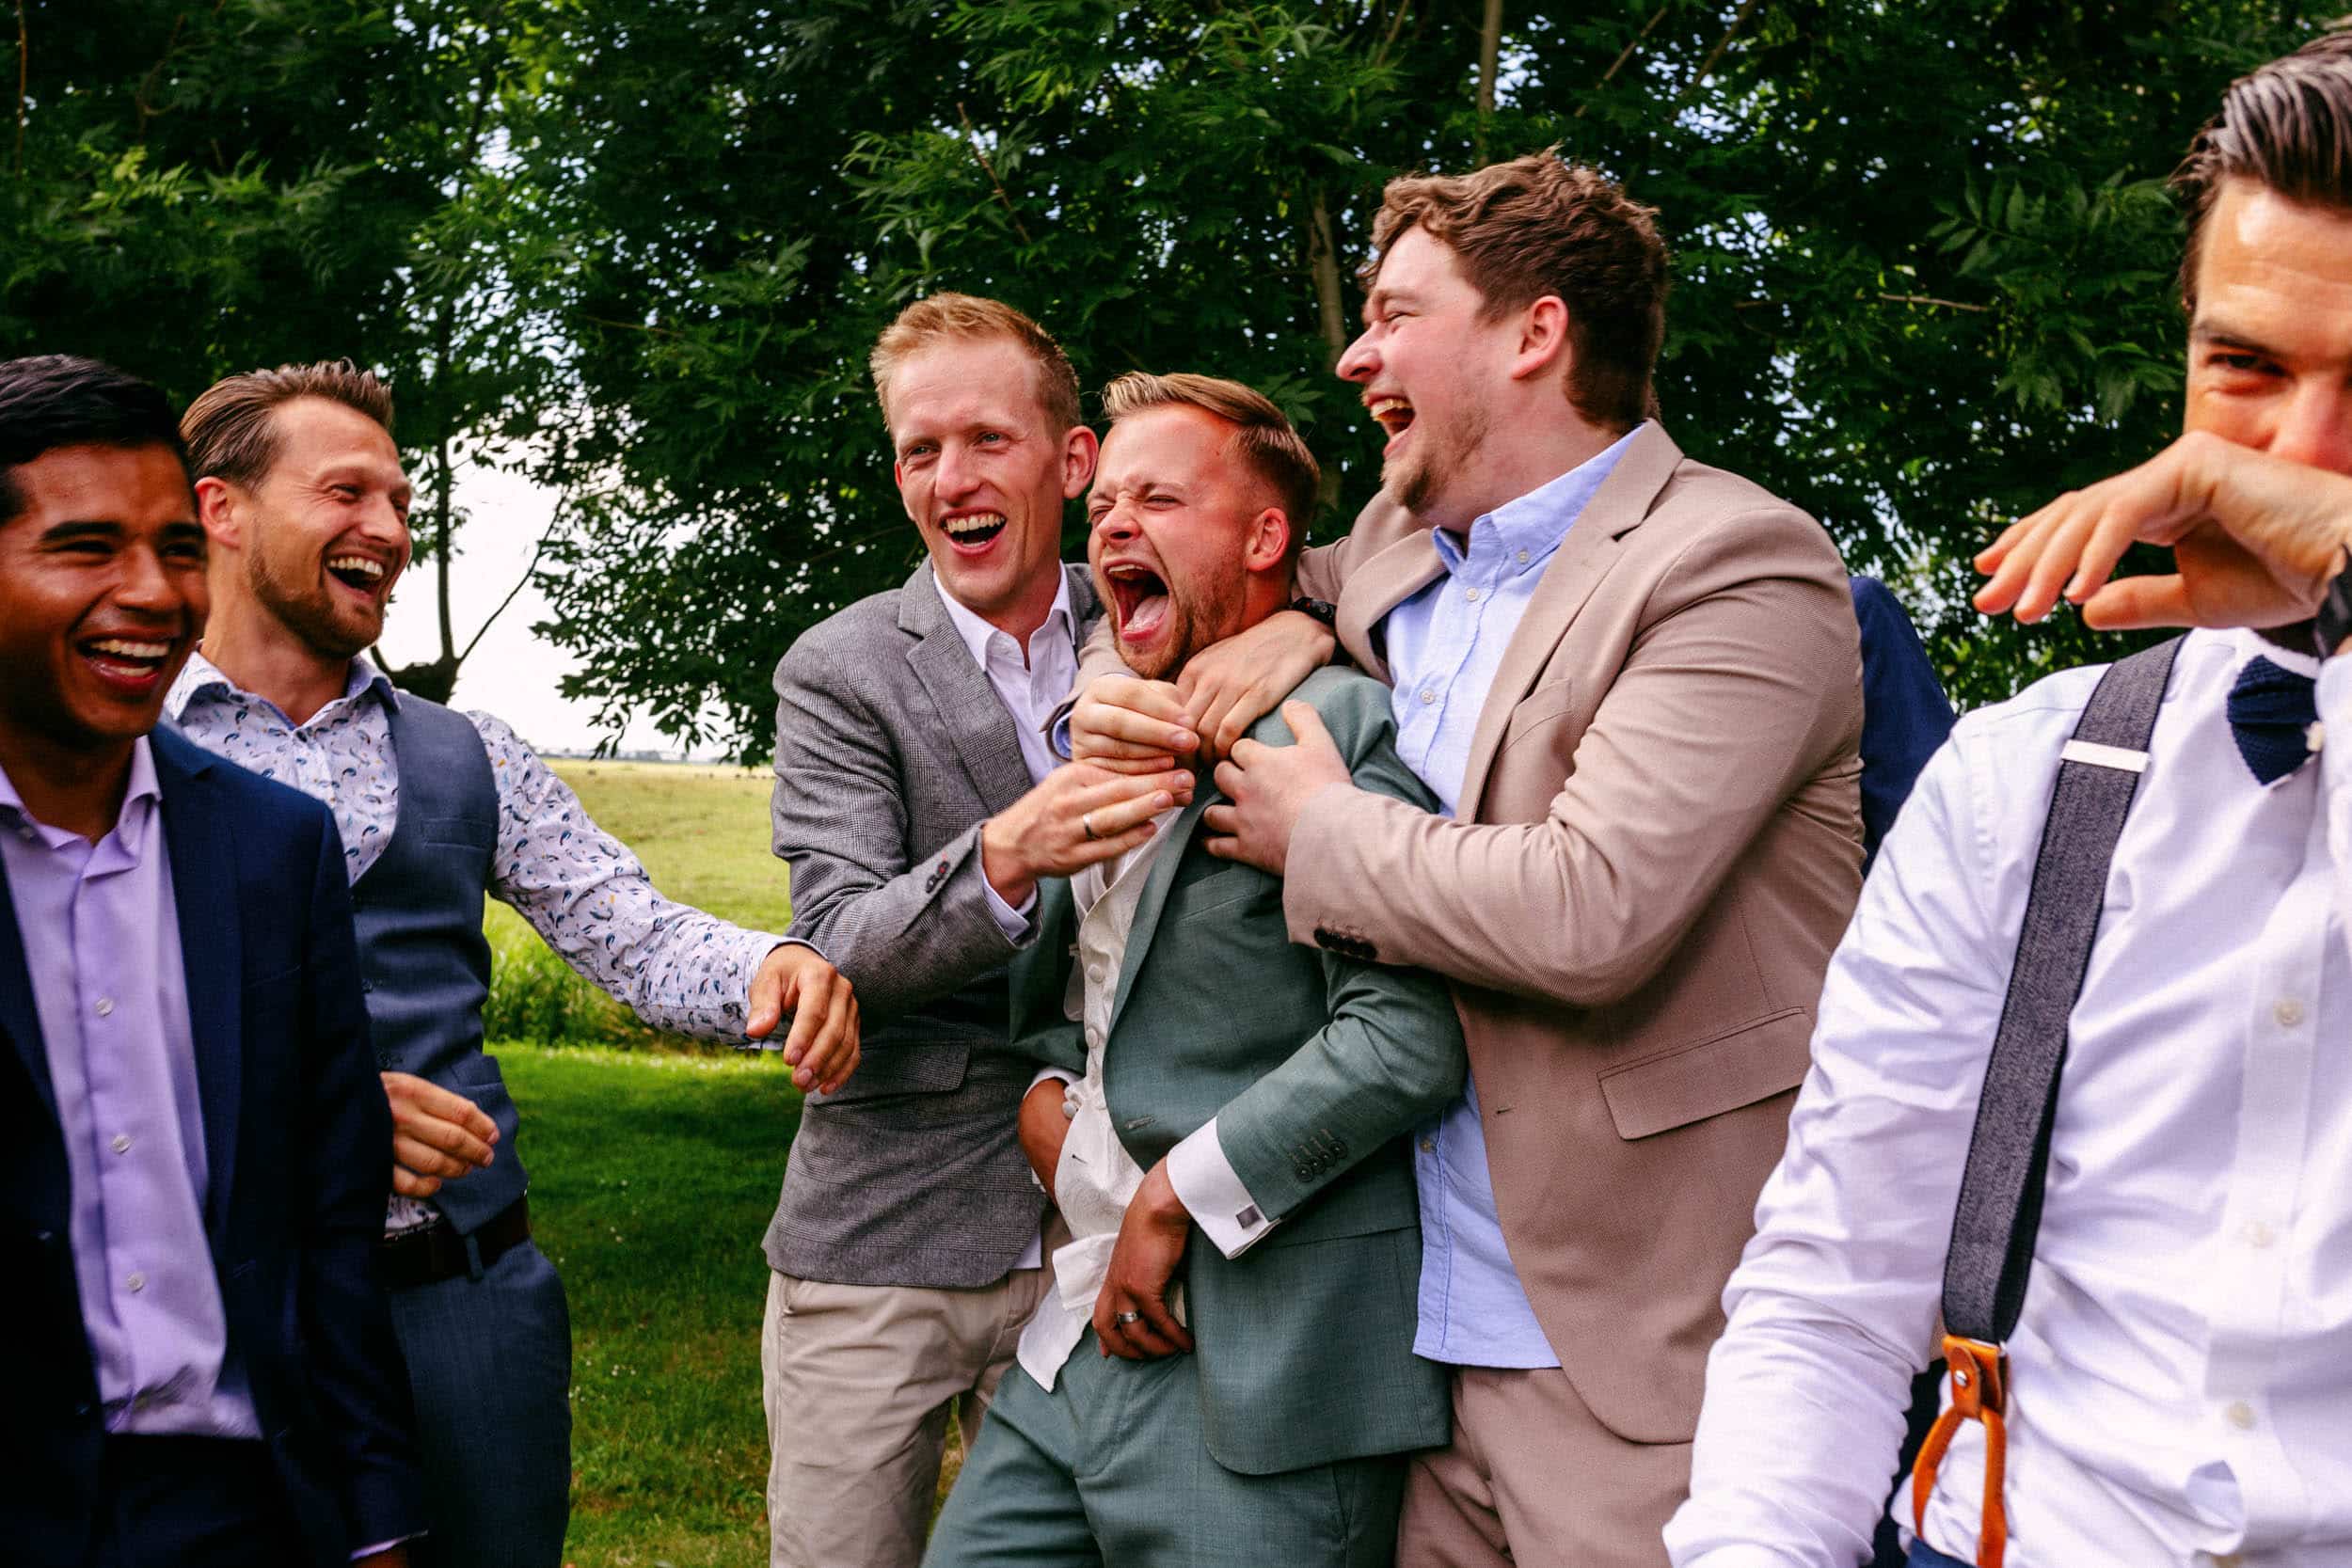 A group of men laughing while wearing stylish wedding attire.